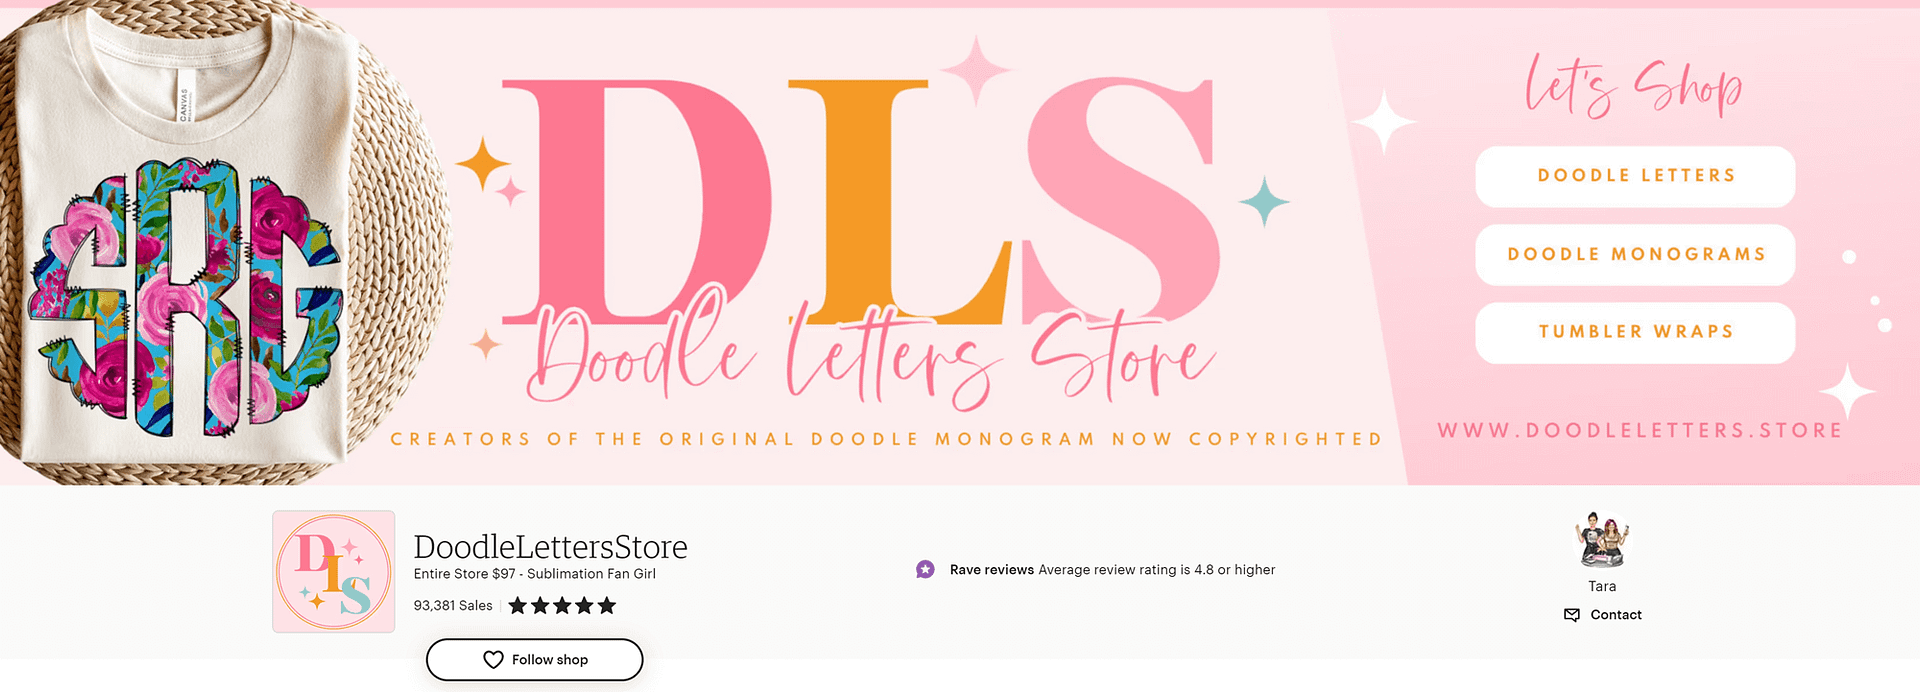 Doodle Letters Store banner